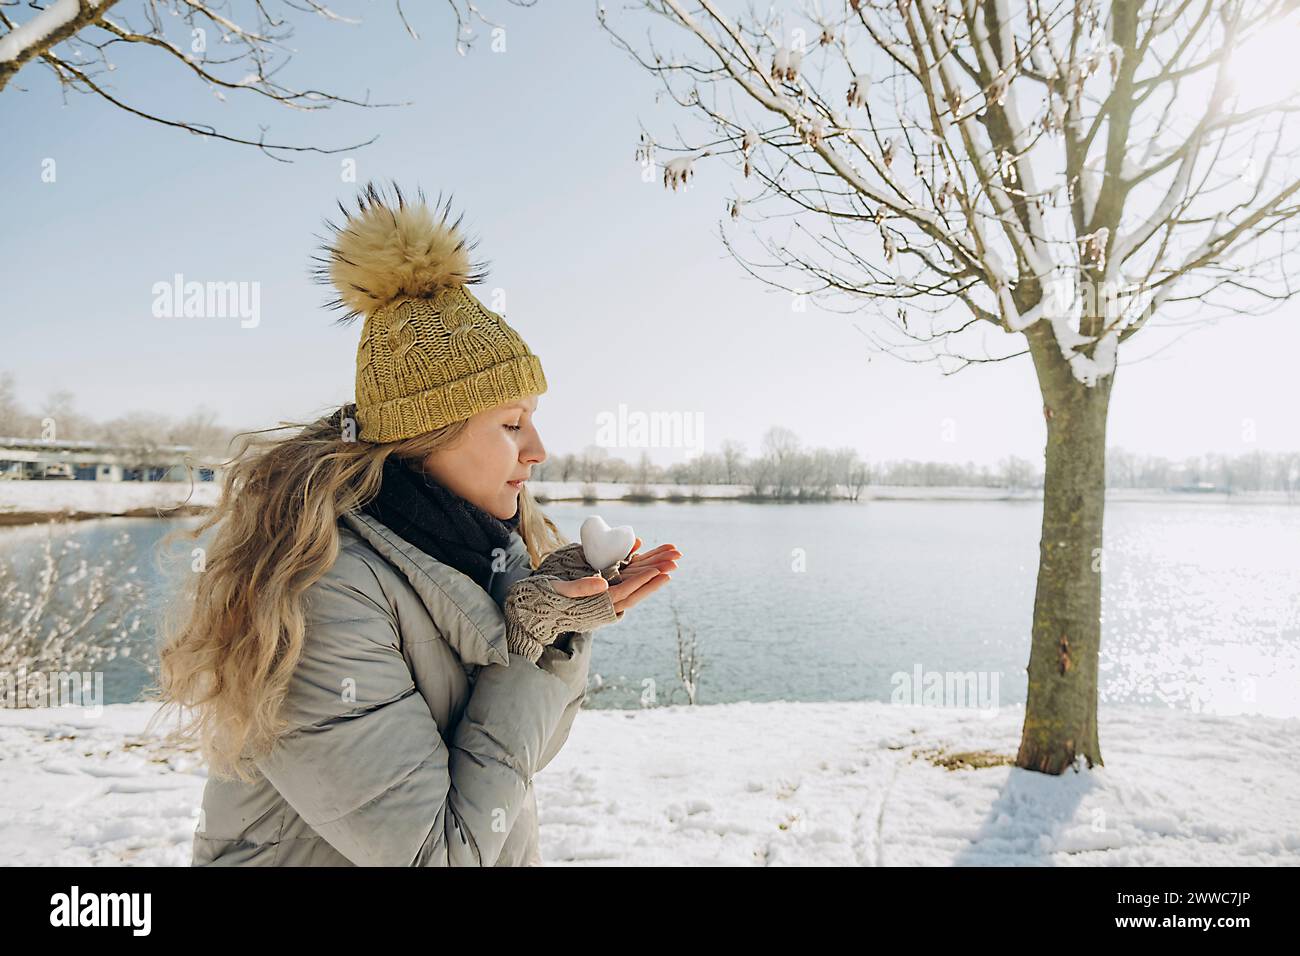 Woman with heart shaped snowball in hand near lake Stock Photo